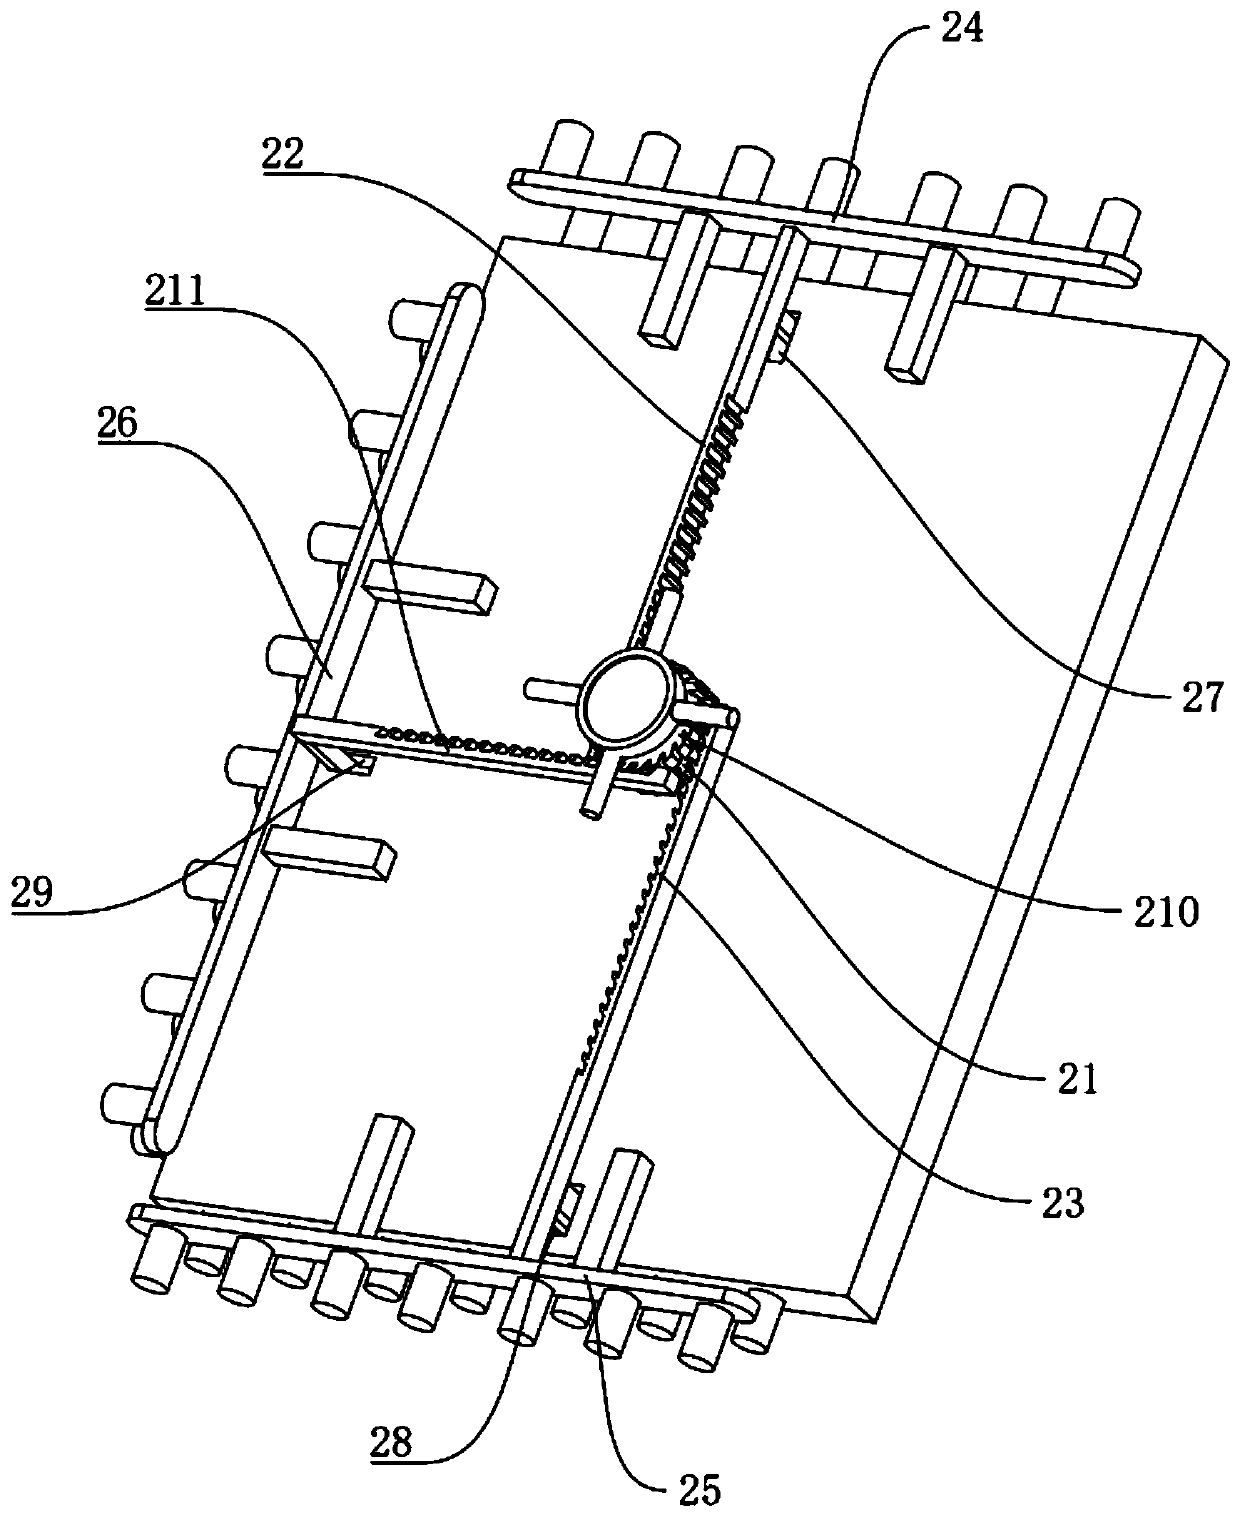 Anti-theft safety device and method for bank vault